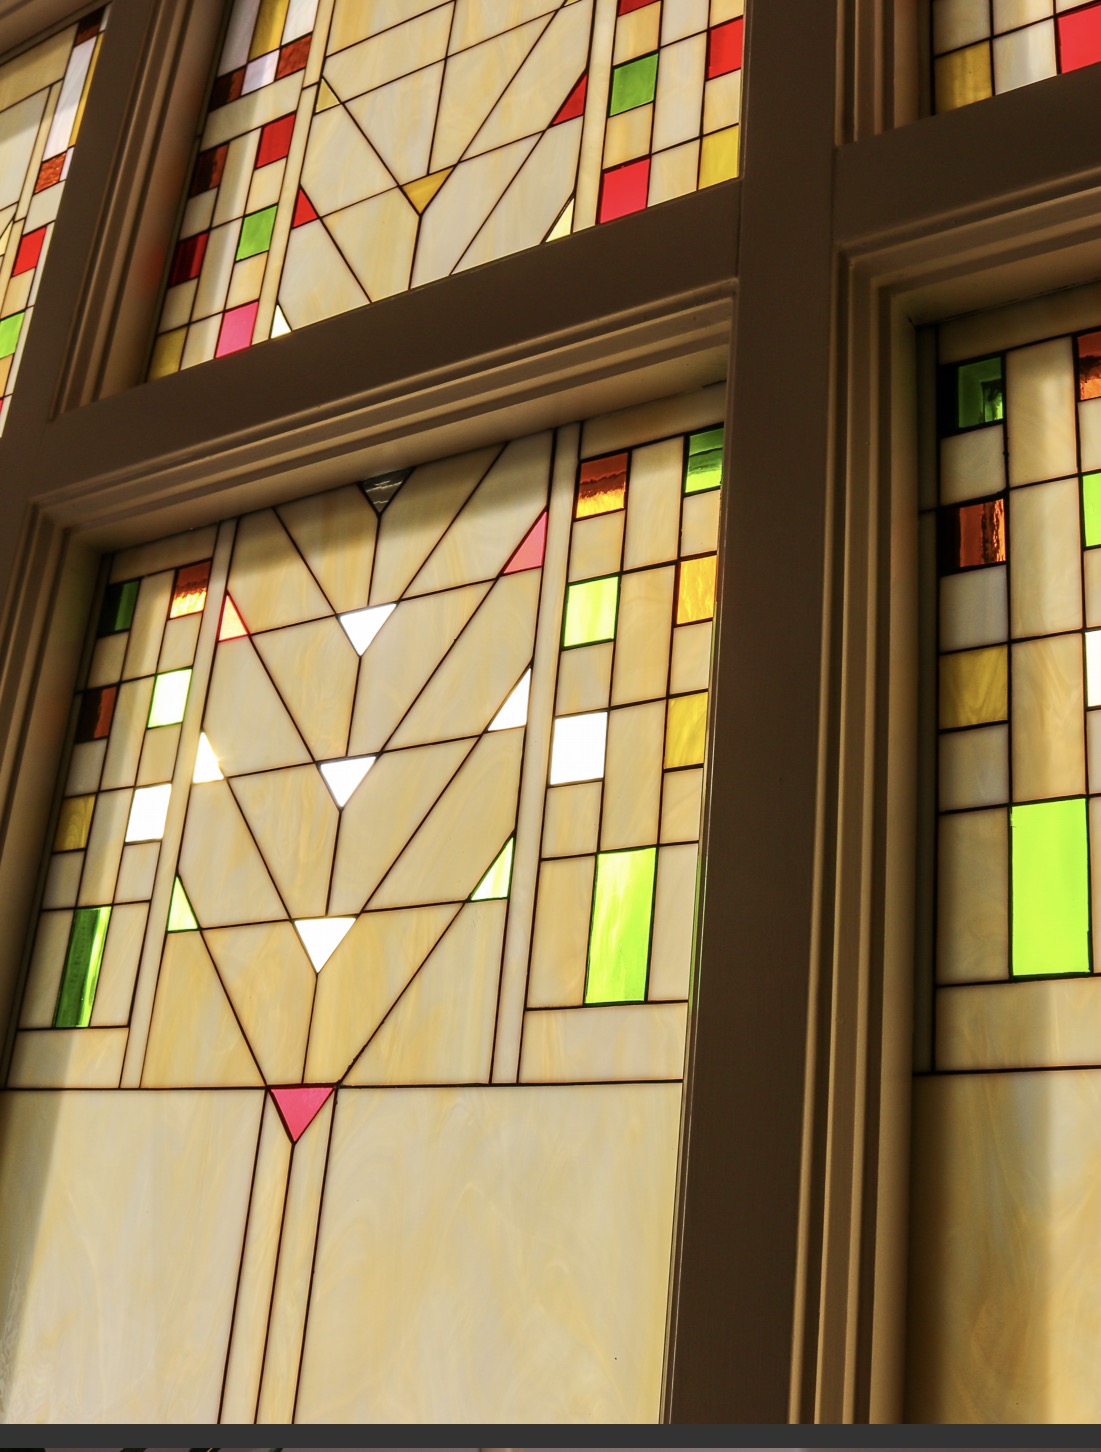 Mission / Prairie Style Stained Glass Windows